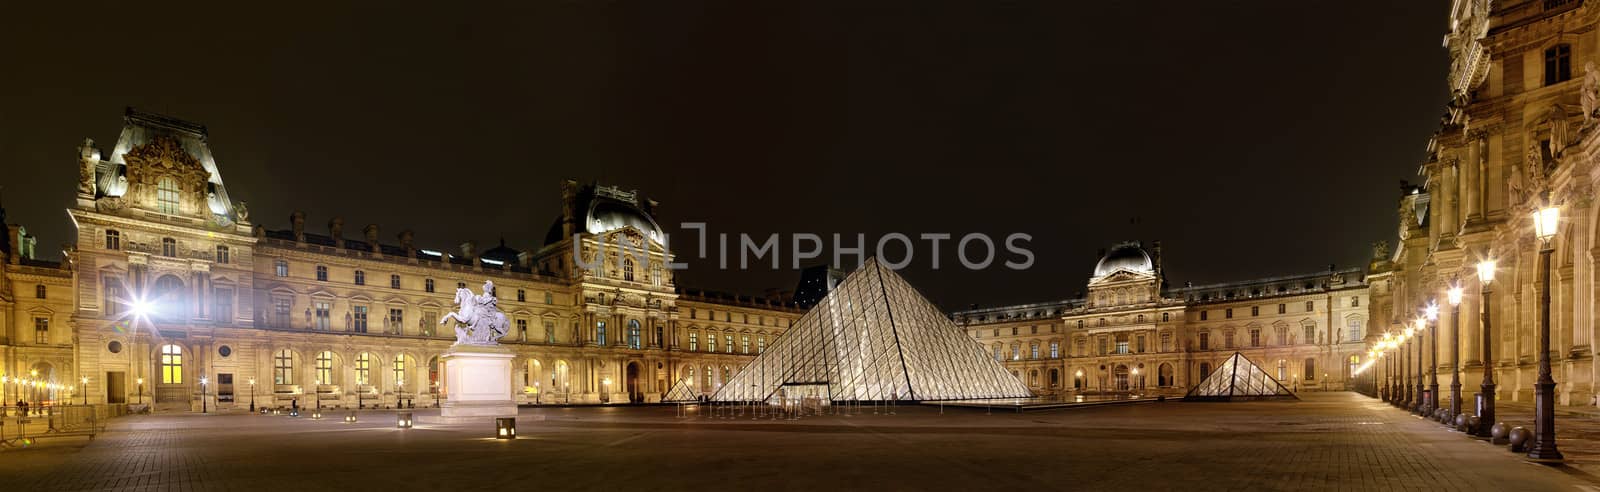 PARIS-APRIL 4: Panoramic view of Louvre Art Museum at night. The Louvre is the biggest Museum in Paris displayed over 60,000 square meters of exhibition space, on April 4, 2013 in Paris, France. by zhu_zhu